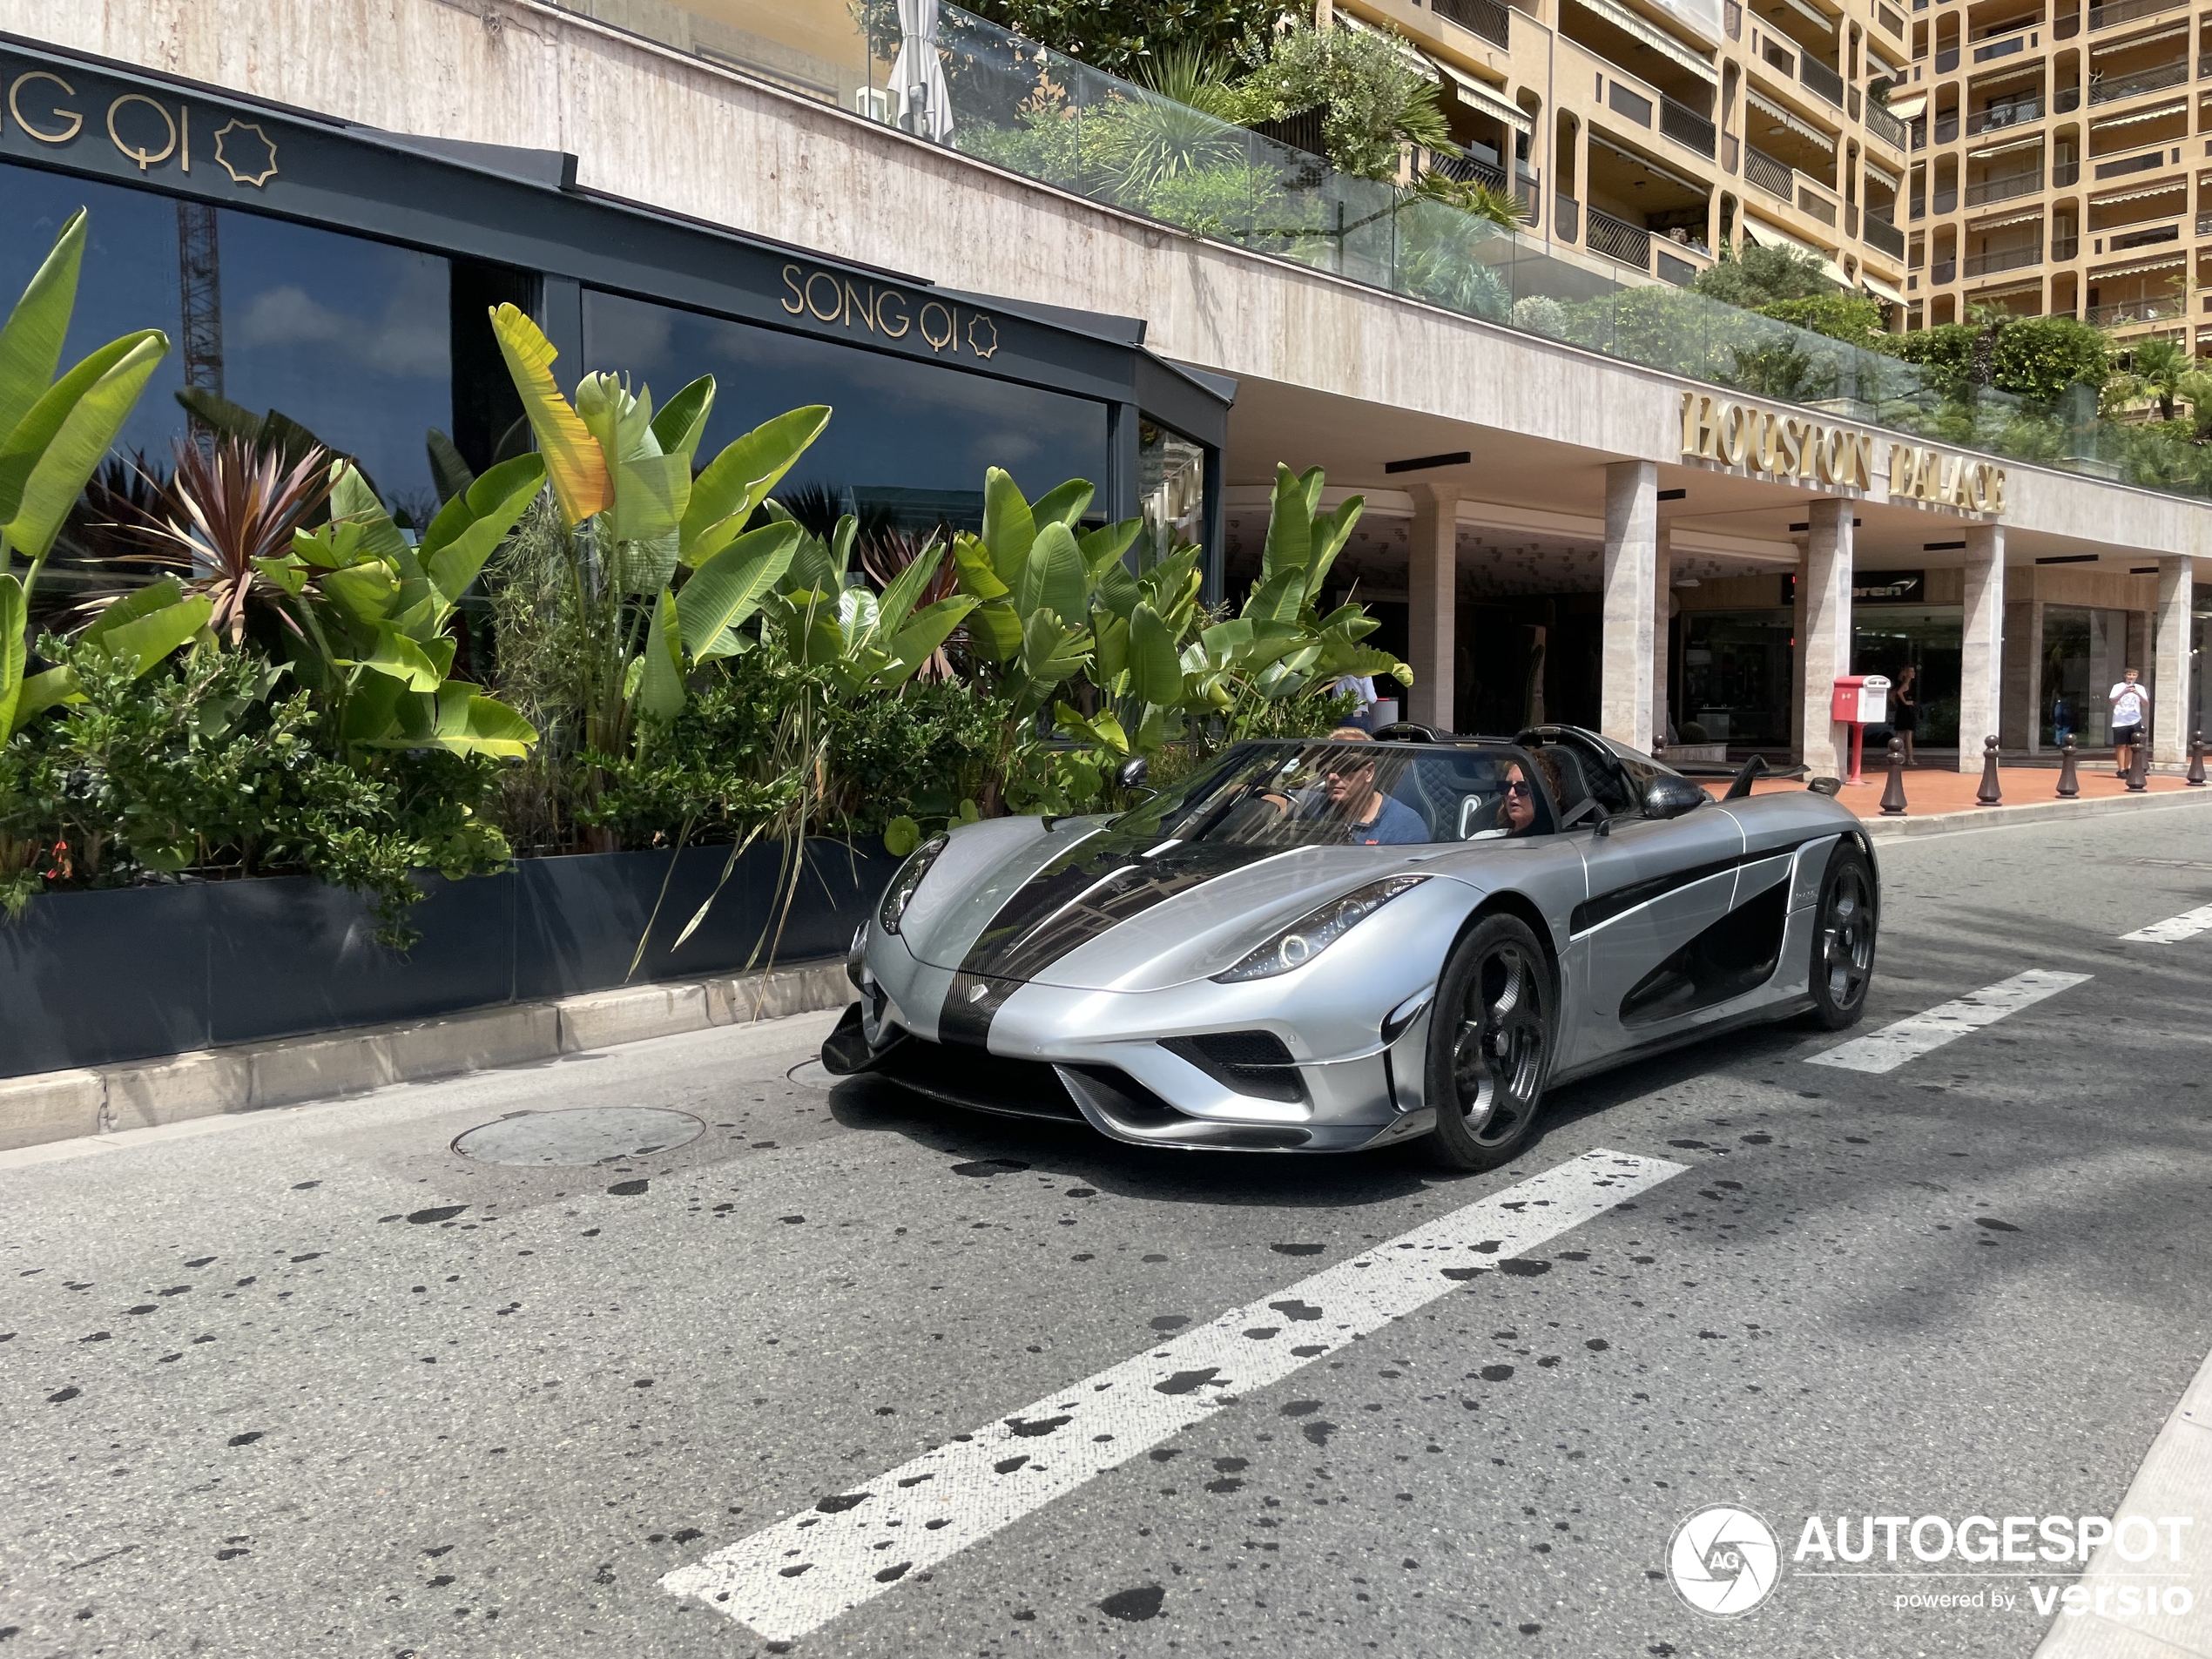 Another Koenigsegg shows up in Monaco